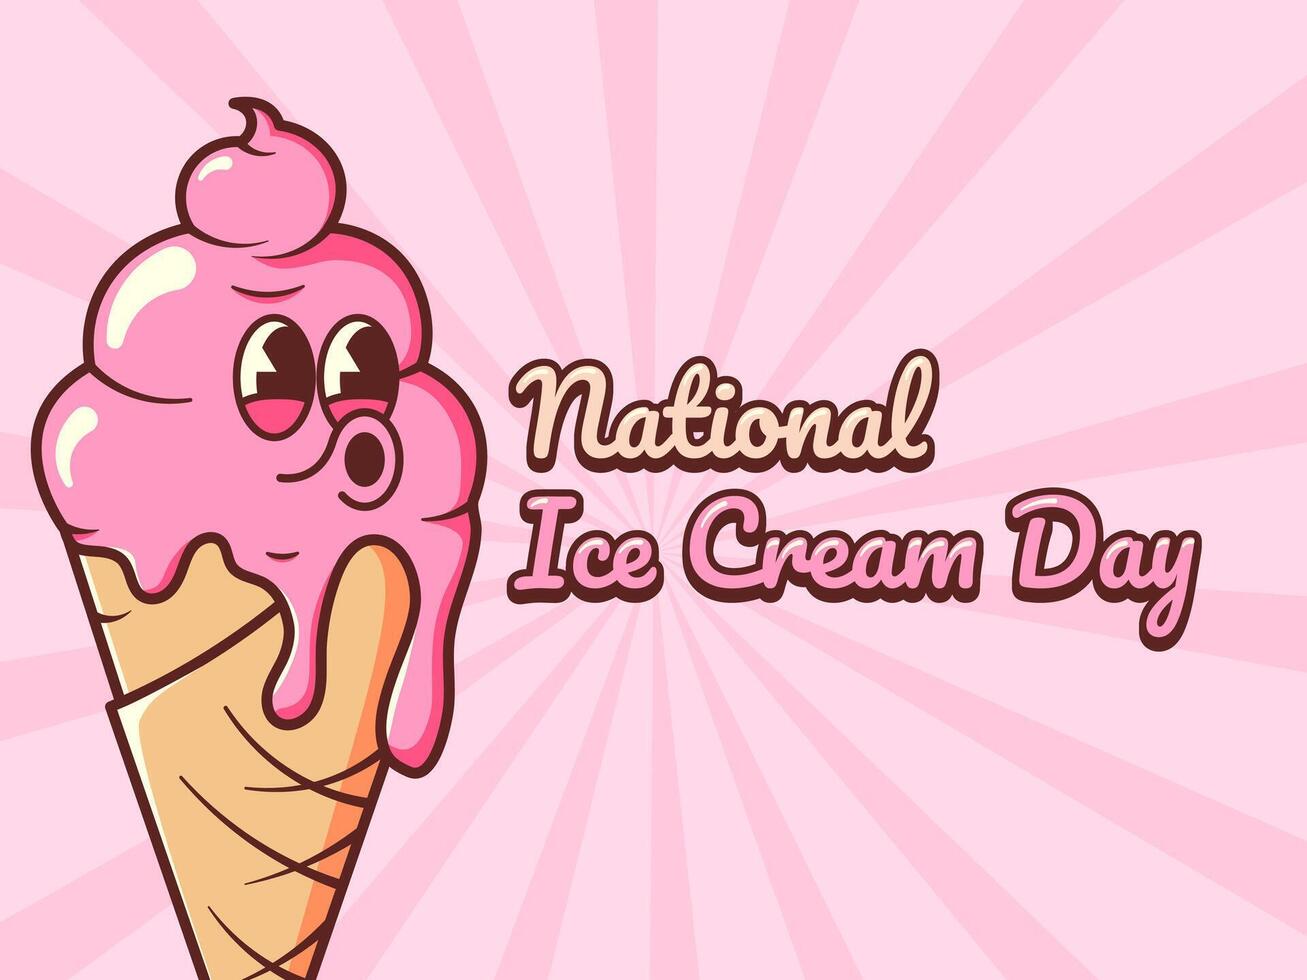 National Ice Cream Day in Retro Style. Vector illustration with groovy mascot